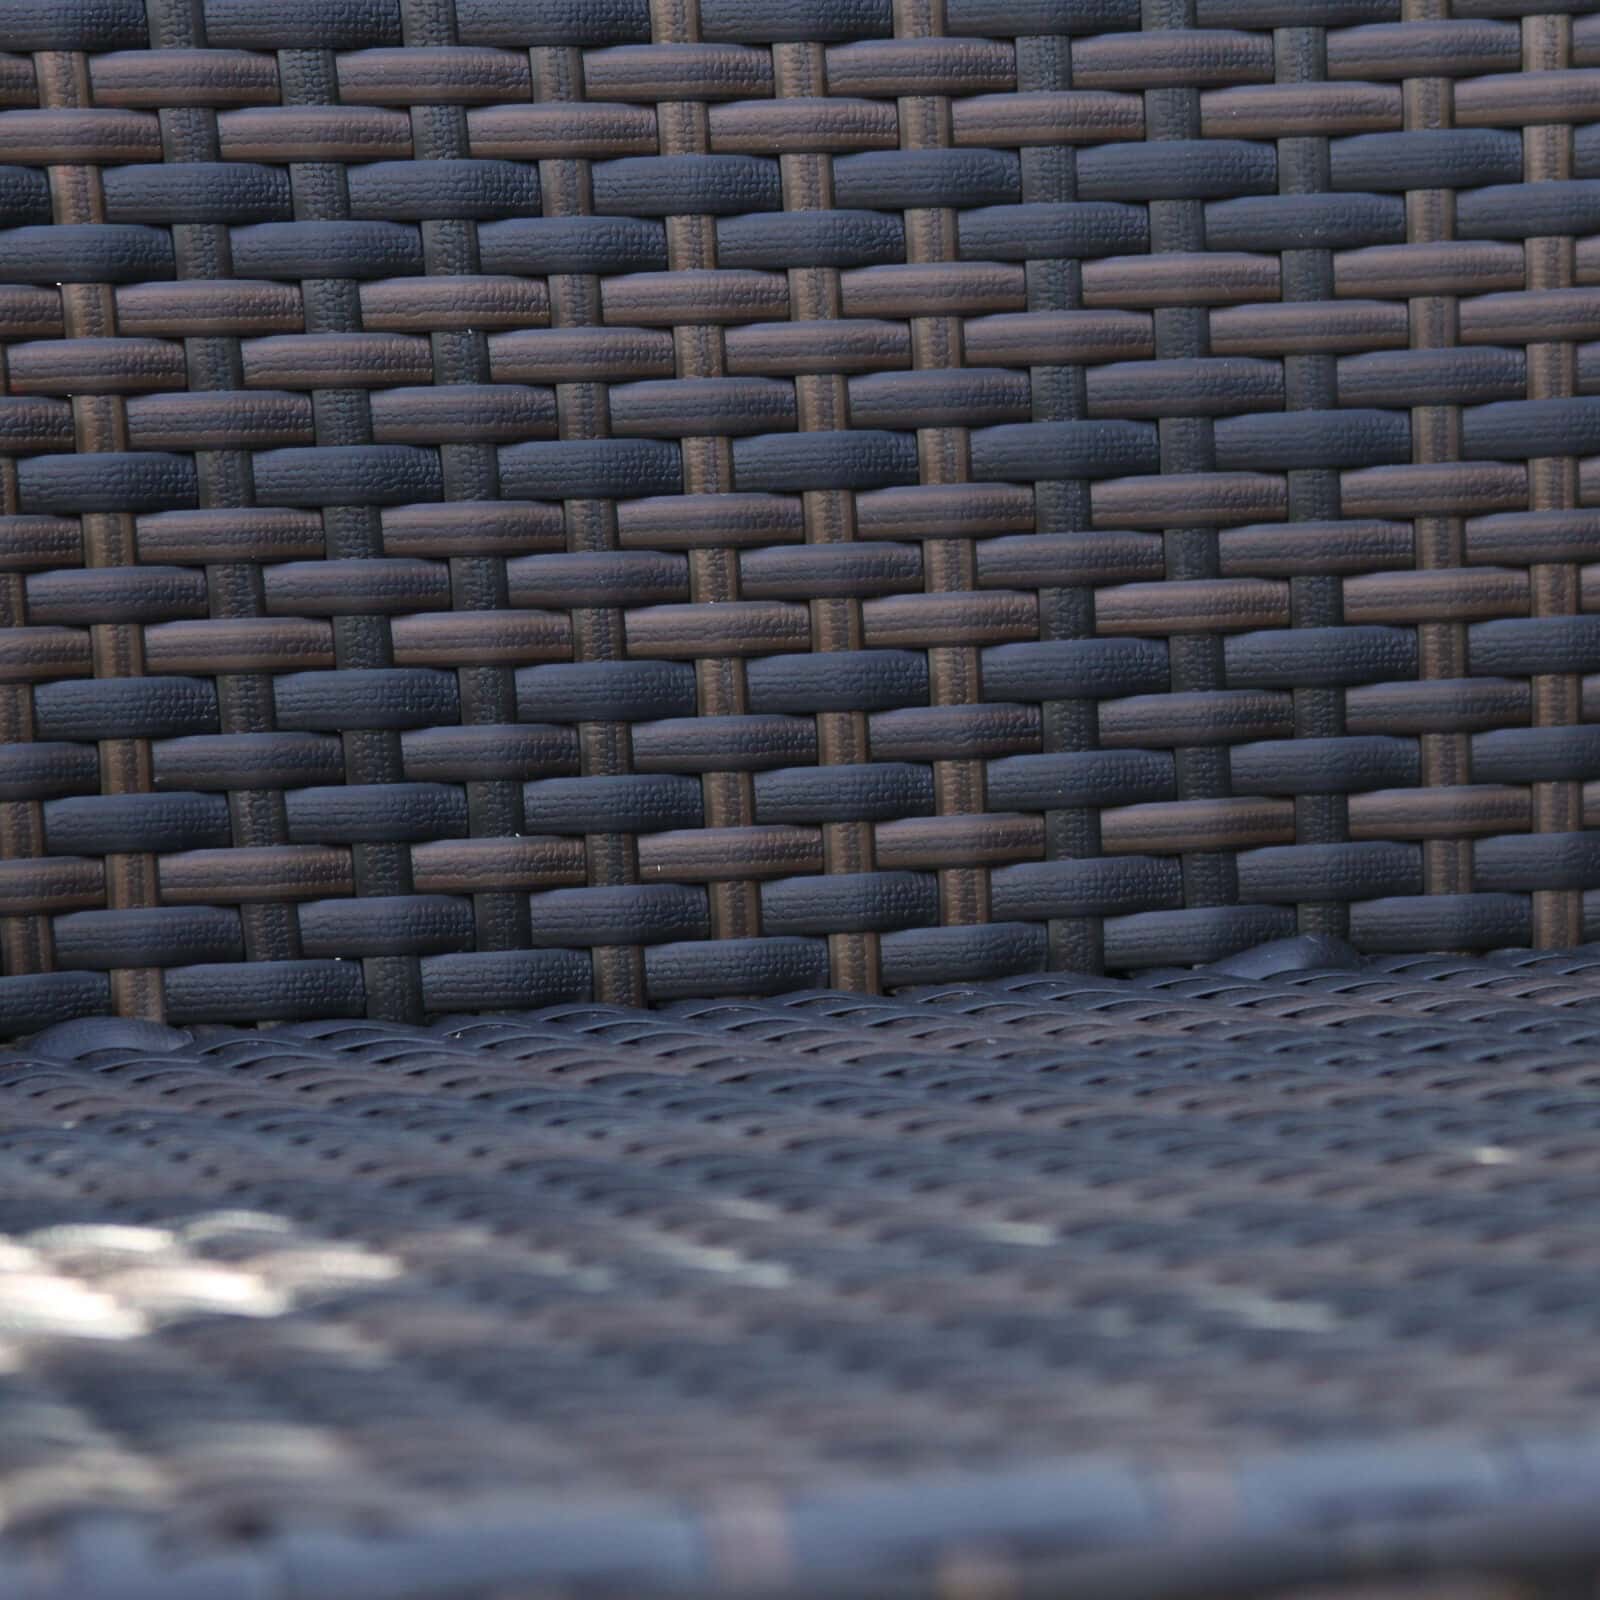 A close up of a wicker chair.